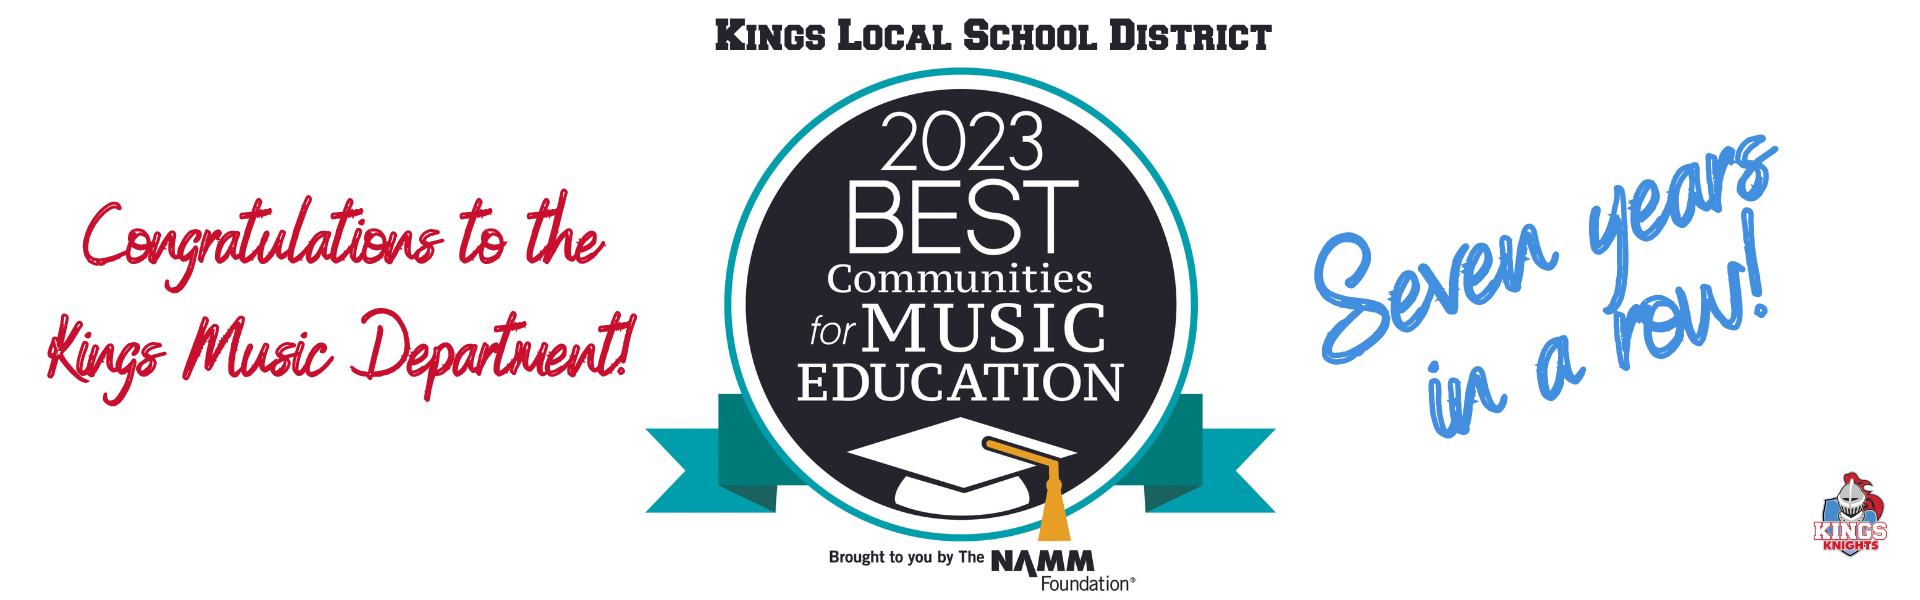 Kings Designated A Best Community for Music Education in 2023 making that 7 years in a row!